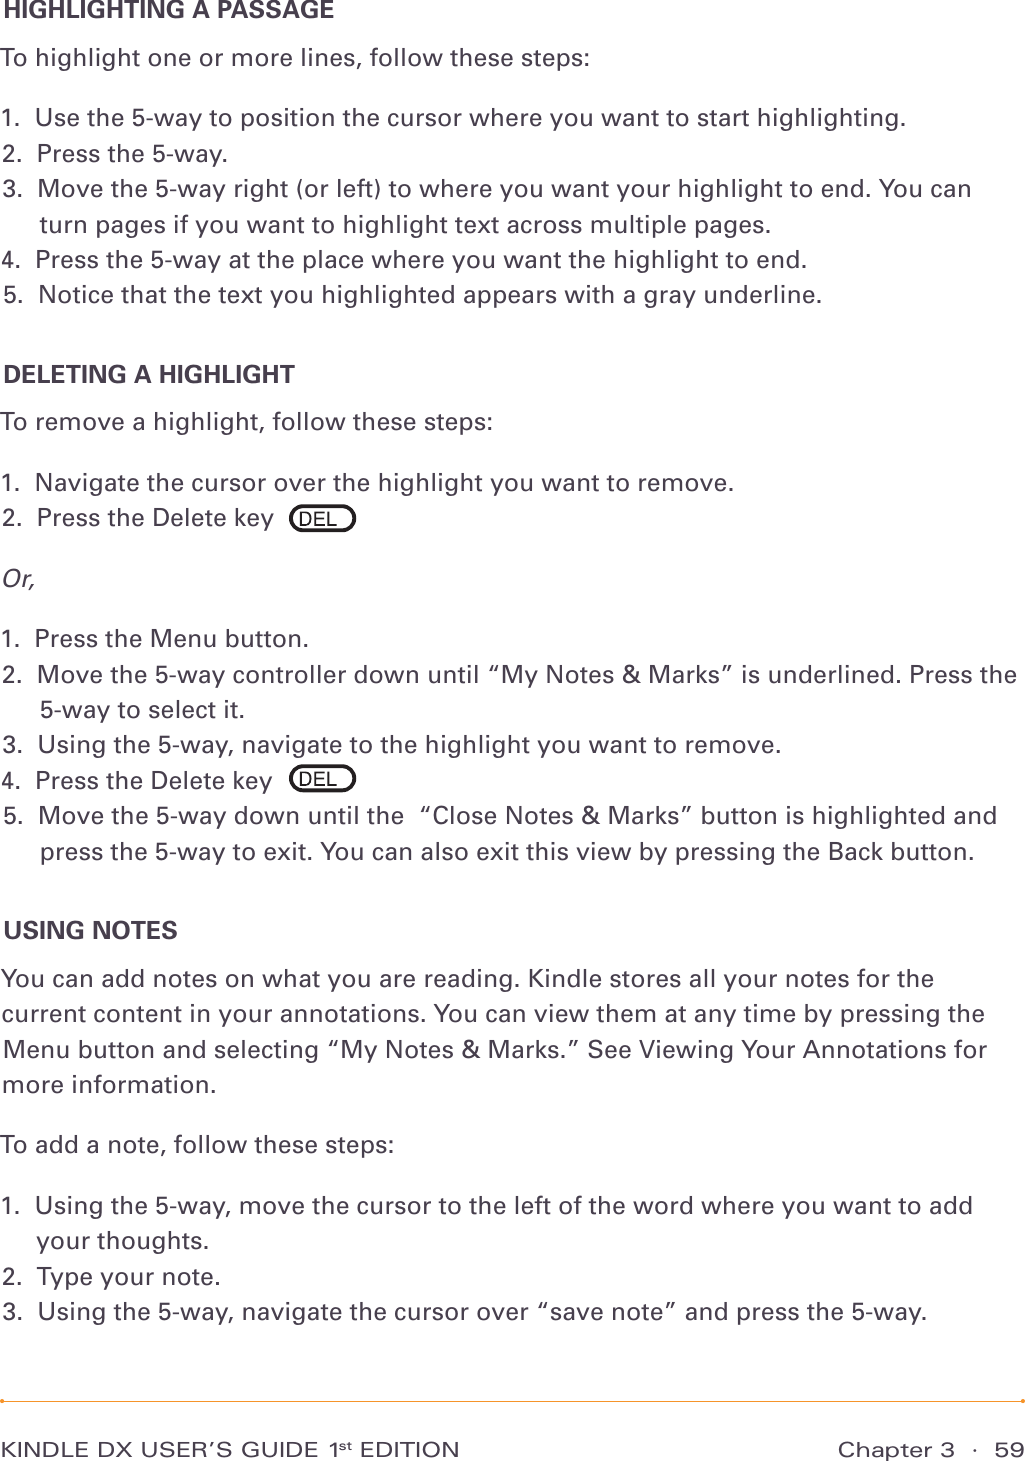 KINDLE DX USER’S GUIDE 1st EDITION Chapter 3  ·  59HIGHLIGHTING A PASSAGETo highlight one or more lines, follow these steps:1.  Use the 5-way to position the cursor where you want to start highlighting. 2.  Press the 5-way. 3.   Move the 5-way right (or left) to where you want your highlight to end. You can turn pages if you want to highlight text across multiple pages. 4.  Press the 5-way at the place where you want the highlight to end. 5.  Notice that the text you highlighted appears with a gray underline. DELETING A HIGHLIGHTTo remove a highlight, follow these steps:1.  Navigate the cursor over the highlight you want to remove. 2.  Press the Delete key Or,1.  Press the Menu button. 2.   Move the 5-way controller down until “My Notes &amp; Marks” is underlined. Press the 5-way to select it. 3.  Using the 5-way, navigate to the highlight you want to remove. 4.  Press the Delete key 5.   Move the 5-way down until the  “Close Notes &amp; Marks” button is highlighted and press the 5-way to exit. You can also exit this view by pressing the Back button. USING NOTESYou can add notes on what you are reading. Kindle stores all your notes for the current content in your annotations. You can view them at any time by pressing the Menu button and selecting “My Notes &amp; Marks.” See Viewing Your Annotations for more information.To add a note, follow these steps:1.   Using the 5-way, move the cursor to the left of the word where you want to add your thoughts. 2.  Type your note. 3.  Using the 5-way, navigate the cursor over “save note” and press the 5-way. 